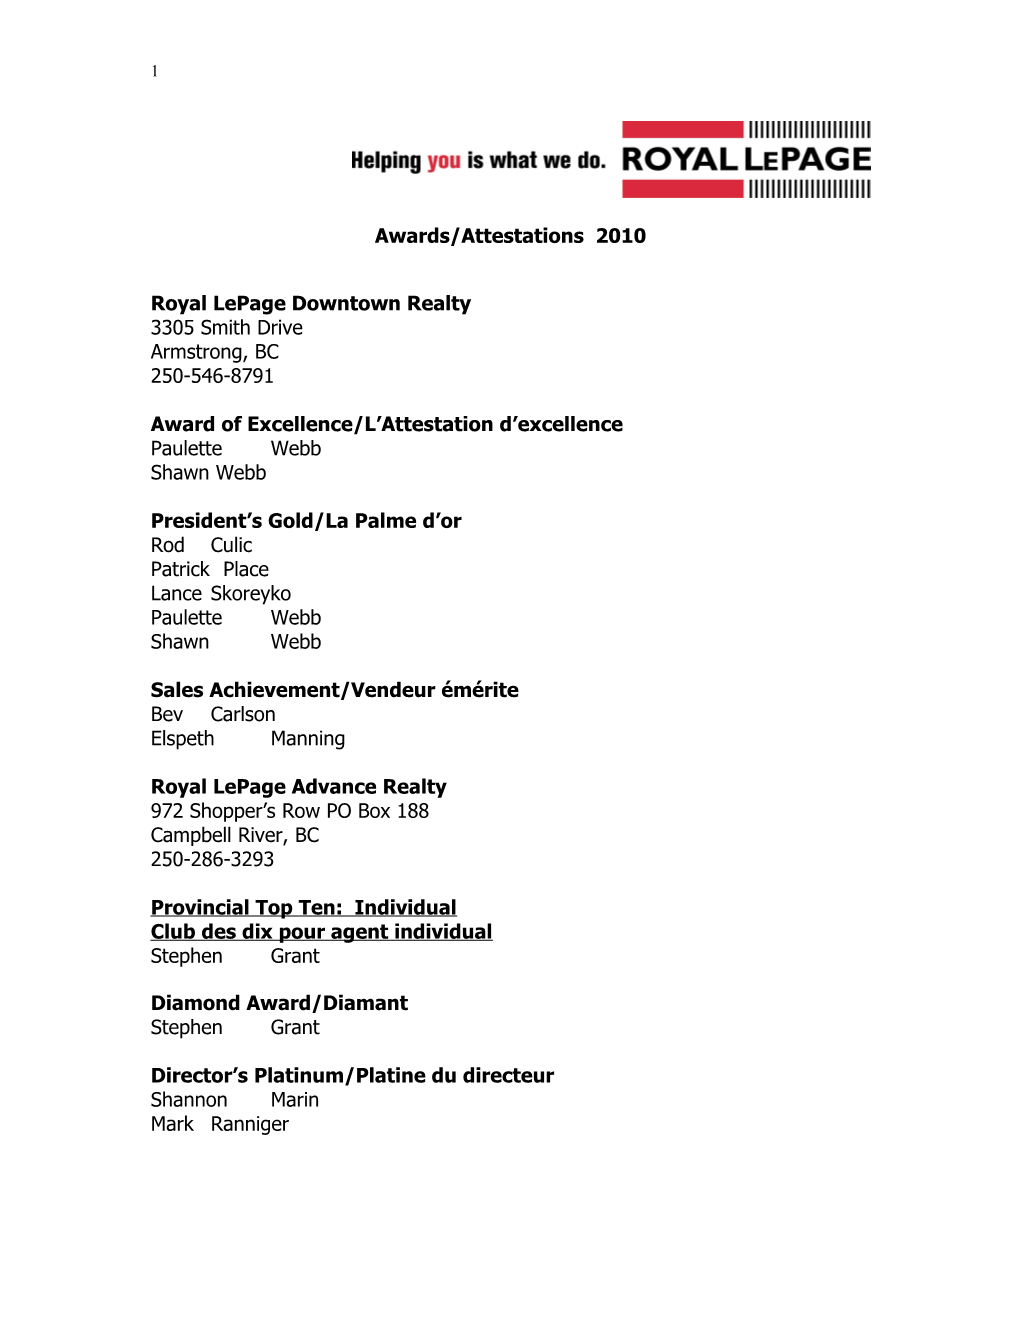 Royal Lepage Downtown Realty